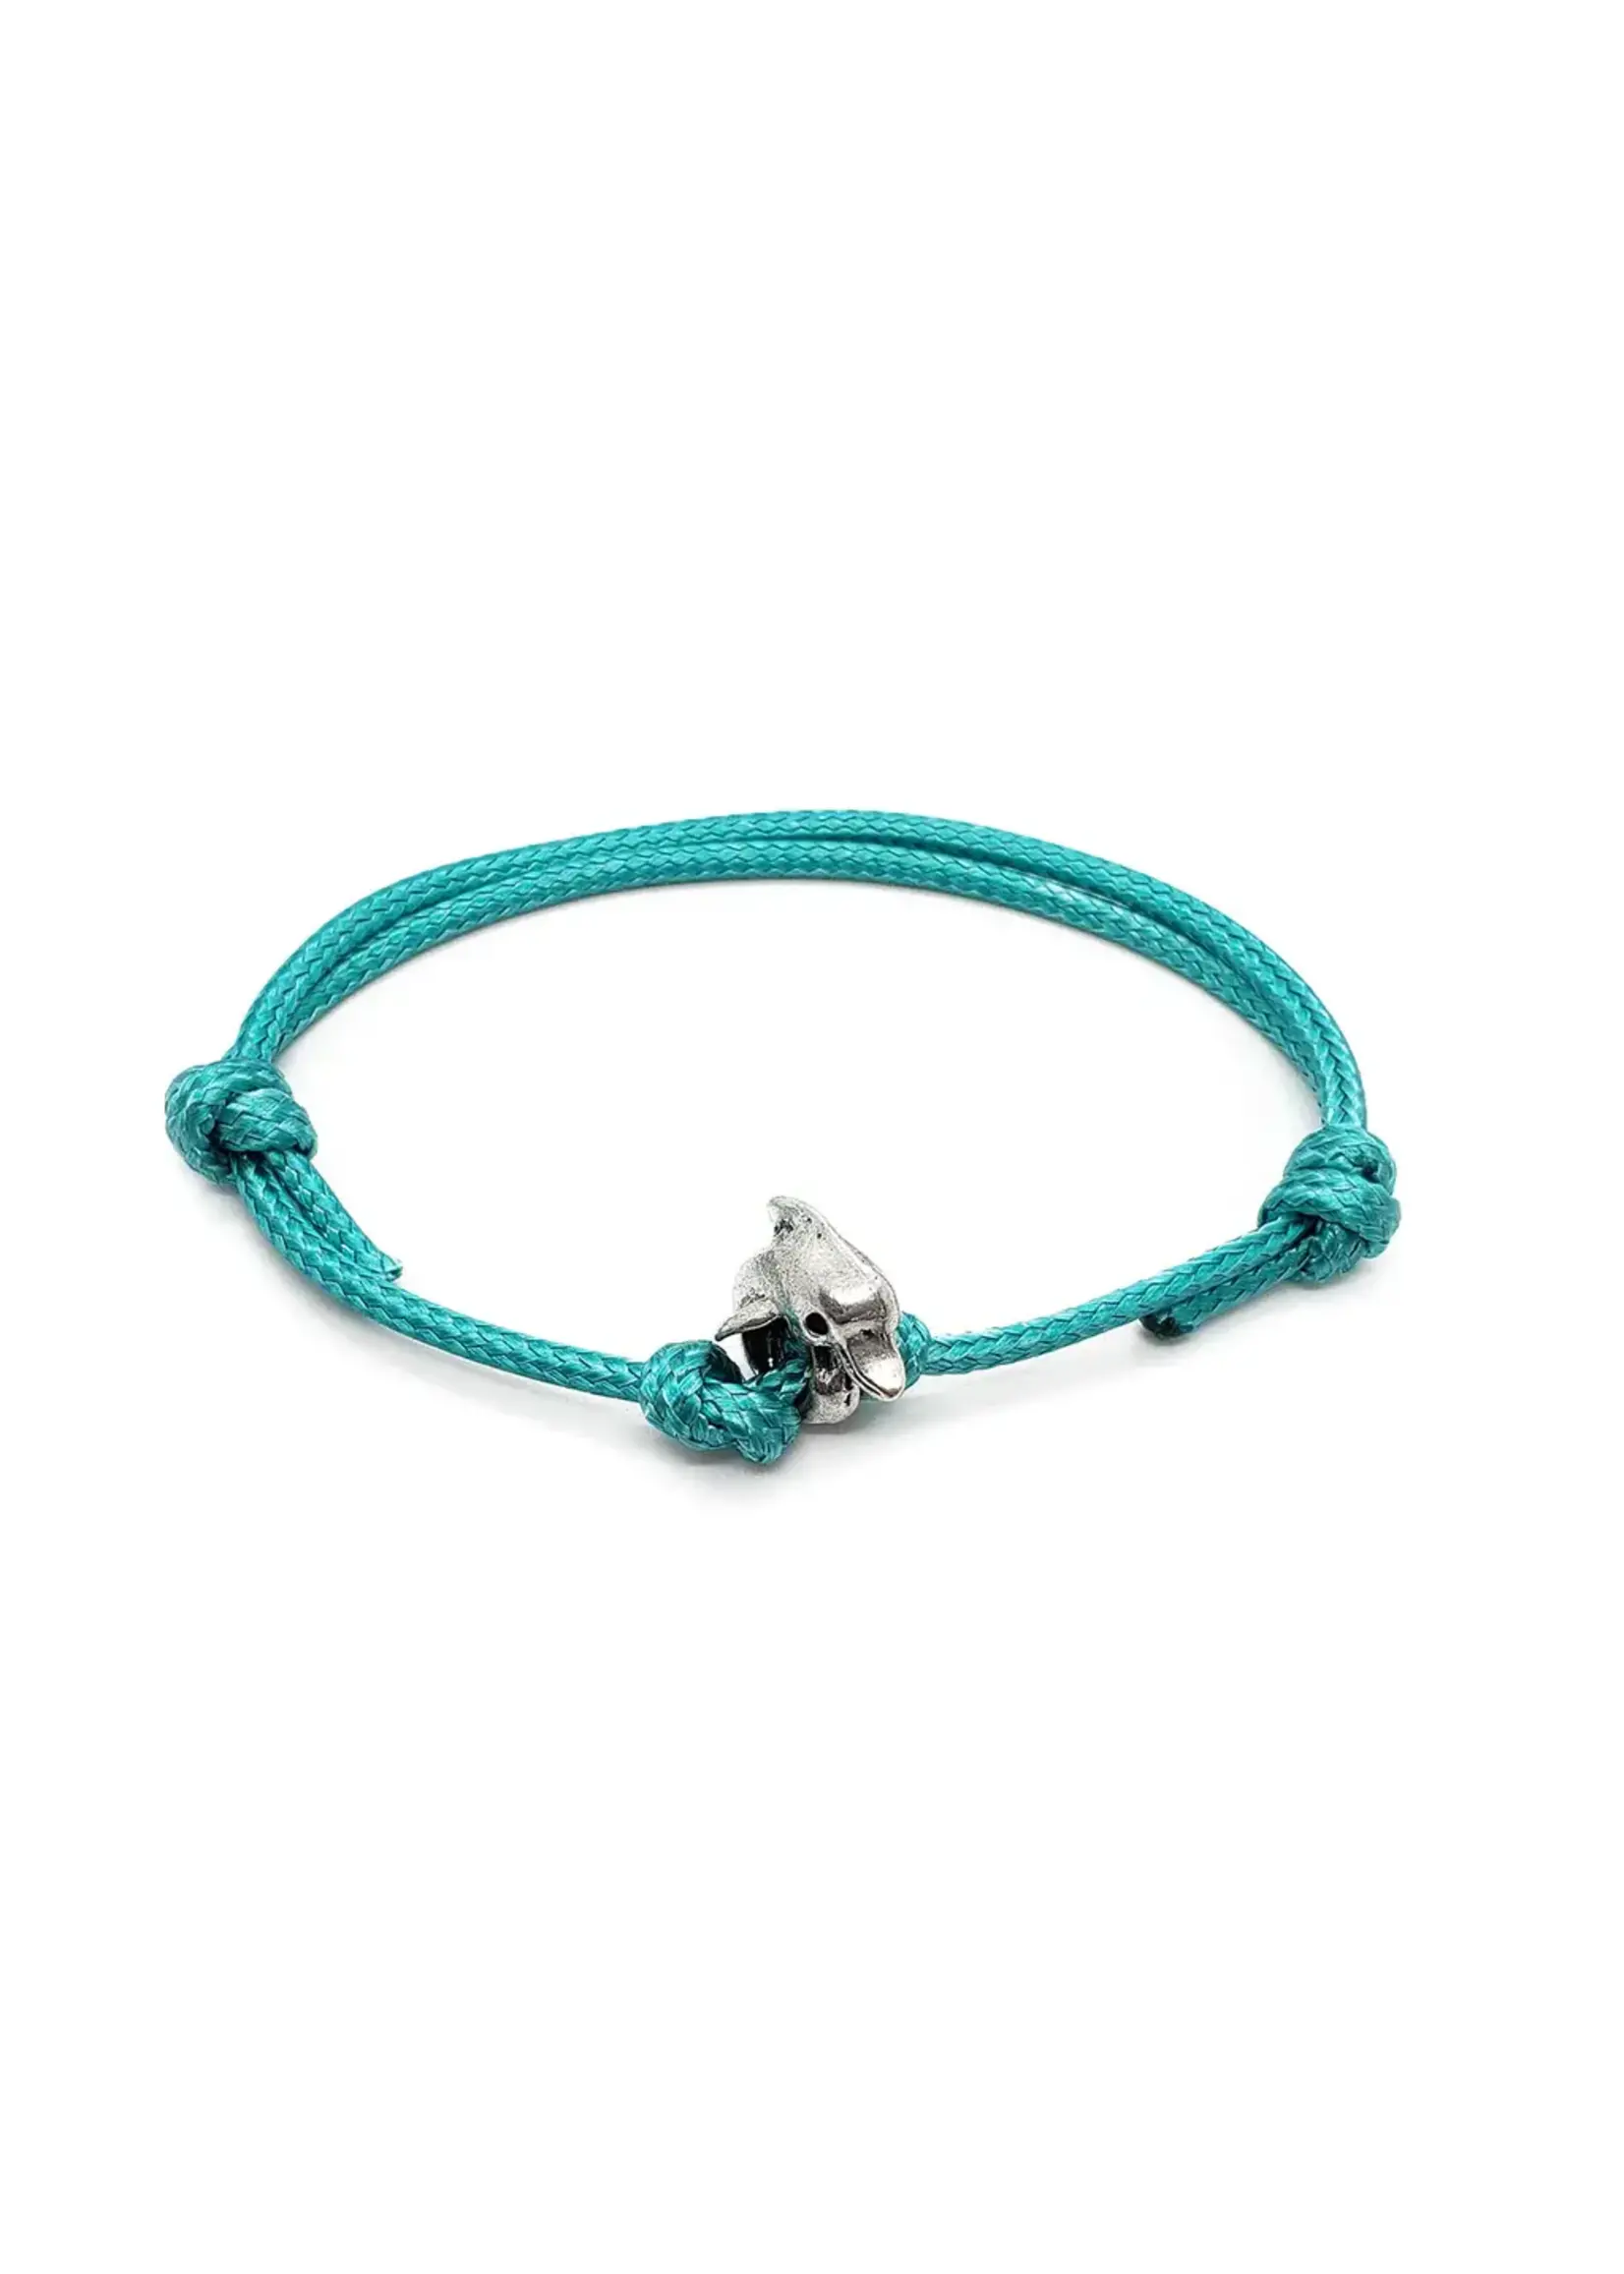 O Yeah Gifts Dolphin Charm Bracelet, Turquoise String